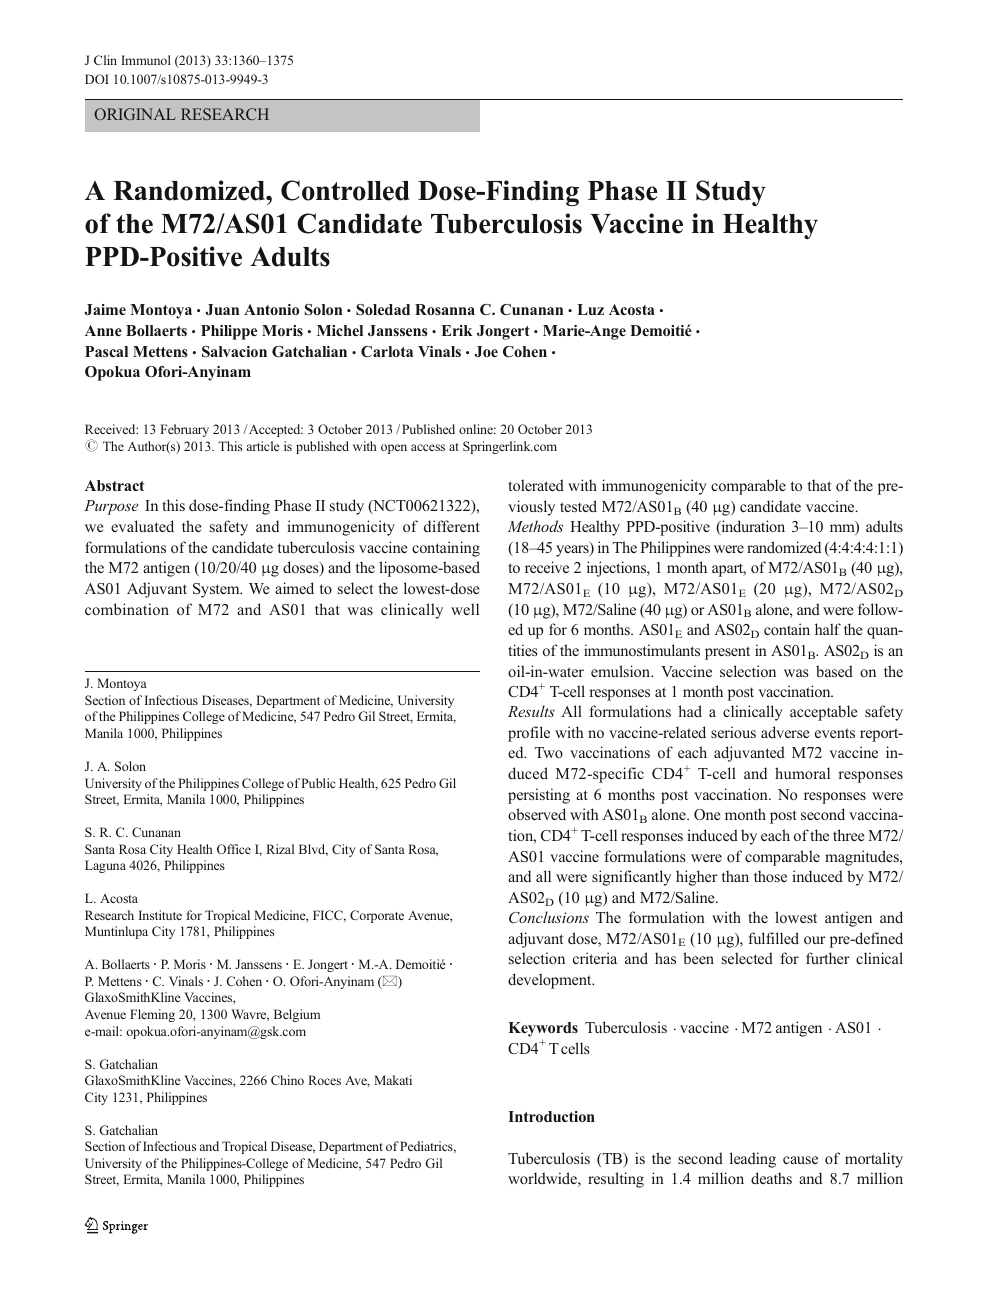 A Randomized Controlled Dose Finding Phase Ii Study Of The M72 As01 Candidate Tuberculosis Vaccine In Healthy Ppd Positive Adults Topic Of Research Paper In Biological Sciences Download Scholarly Article Pdf And Read For